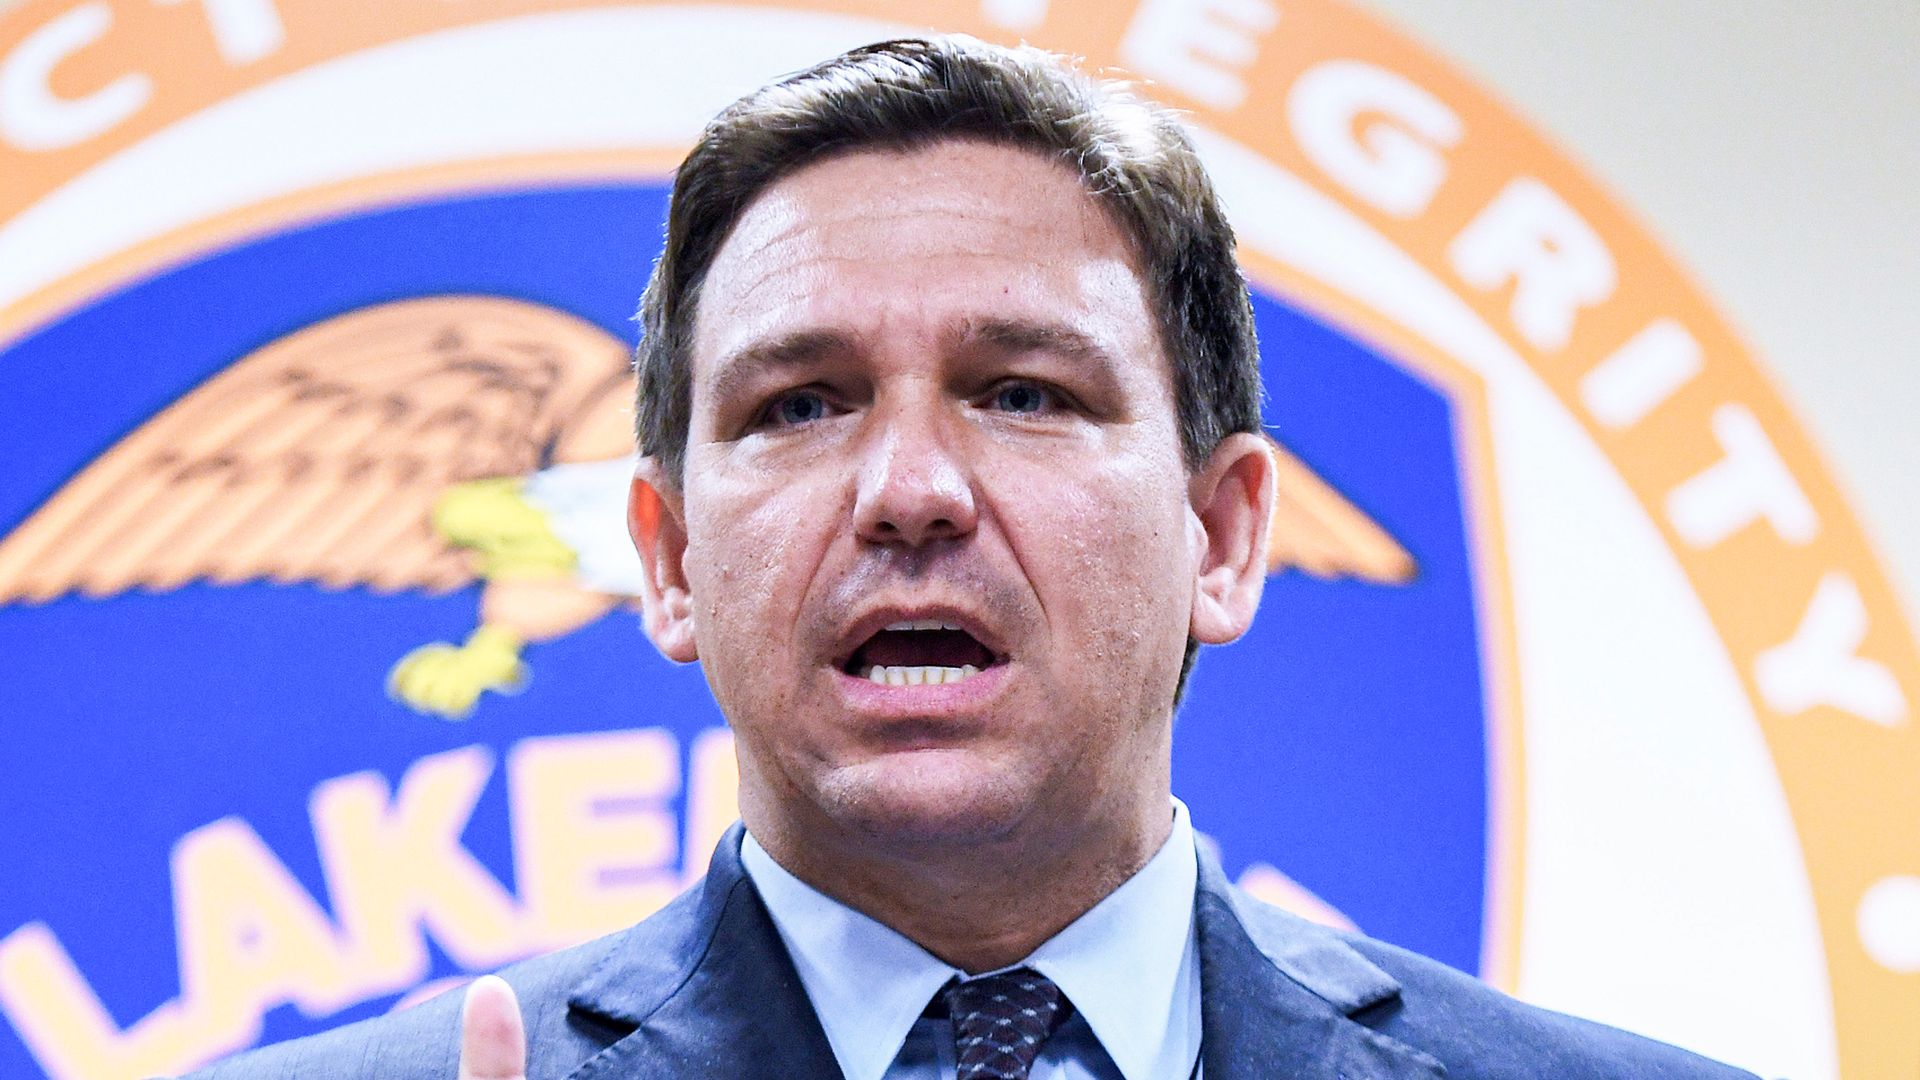 Florida Governor Ron DeSantis speaks at a press conference at the Lakeland, Florida Police Department